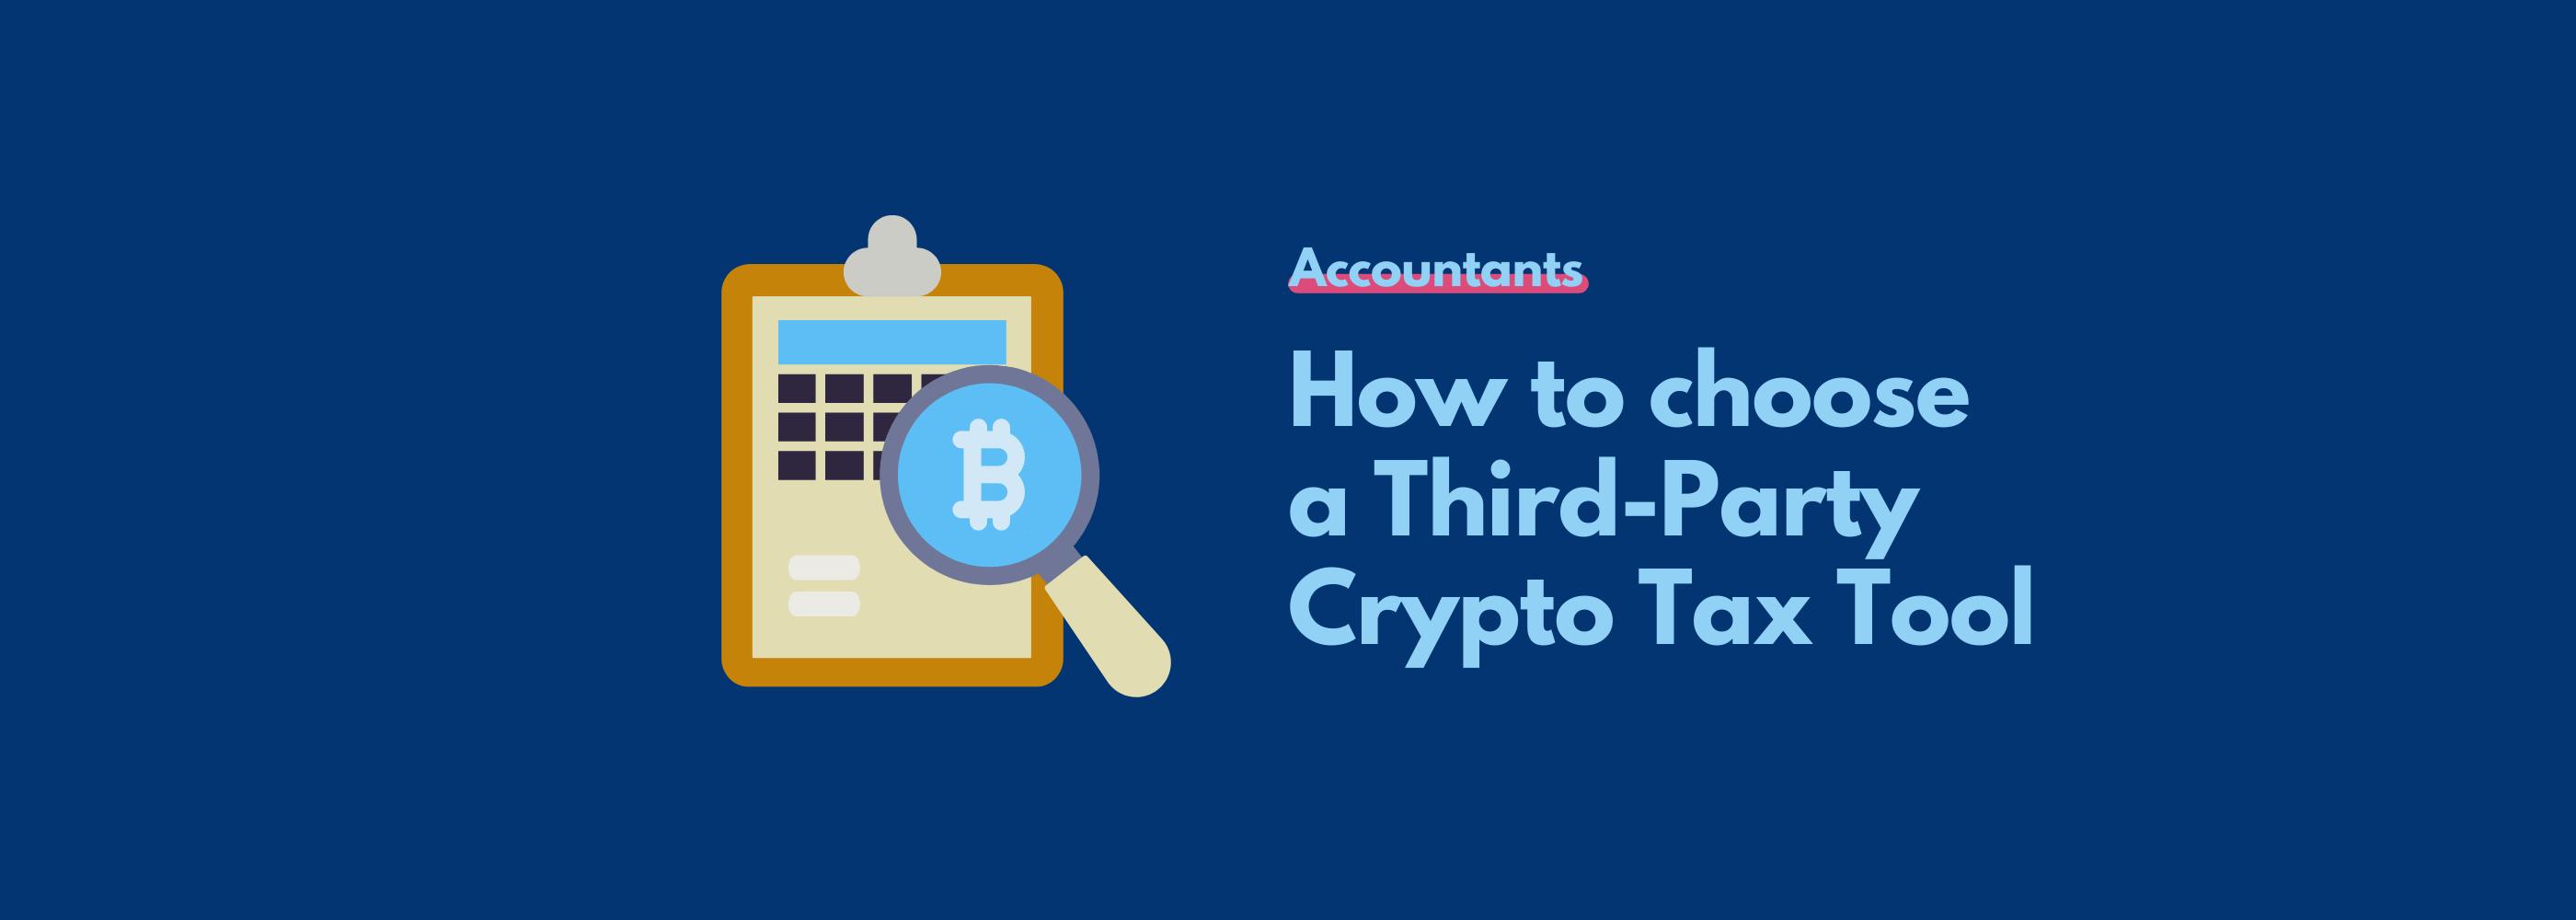 The Accountants Guide To Choosing a Third-Party Crypto Tax Tool